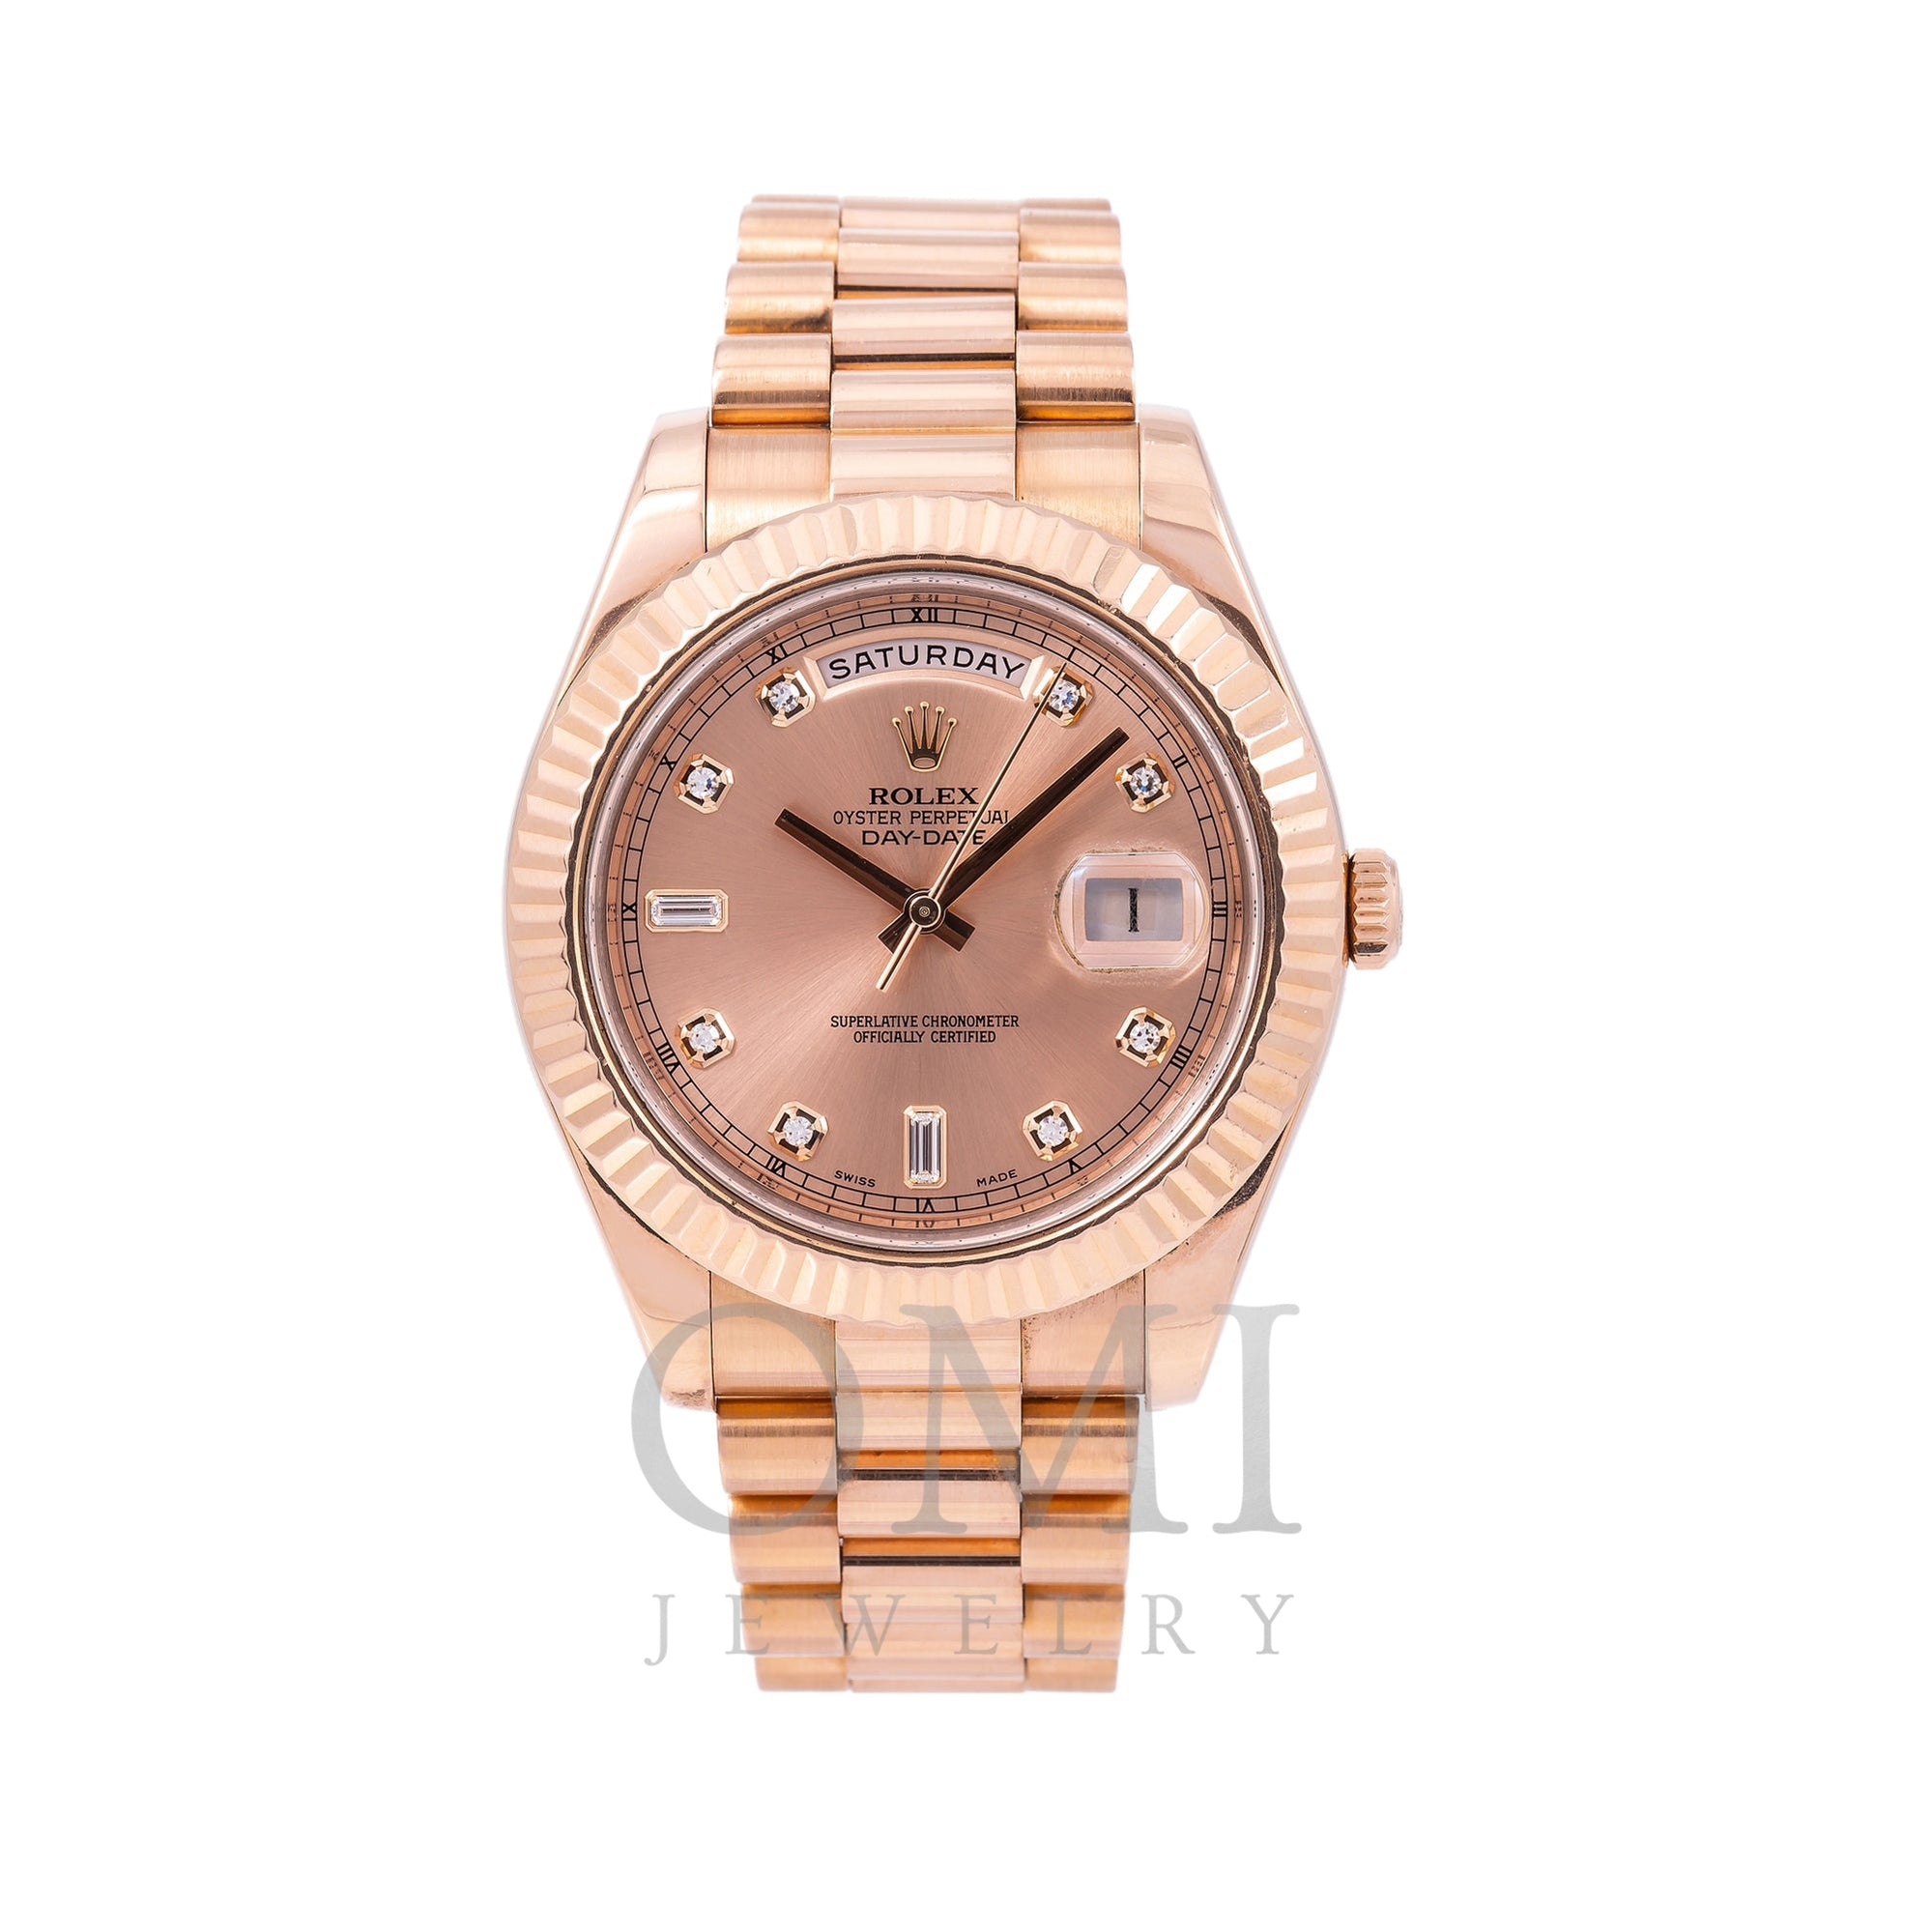 Fejl Resten Beundringsværdig Rolex Day-Date II 218235 41MM Rose Gold Factory Diamond Dial With Pres -  OMI Jewelry